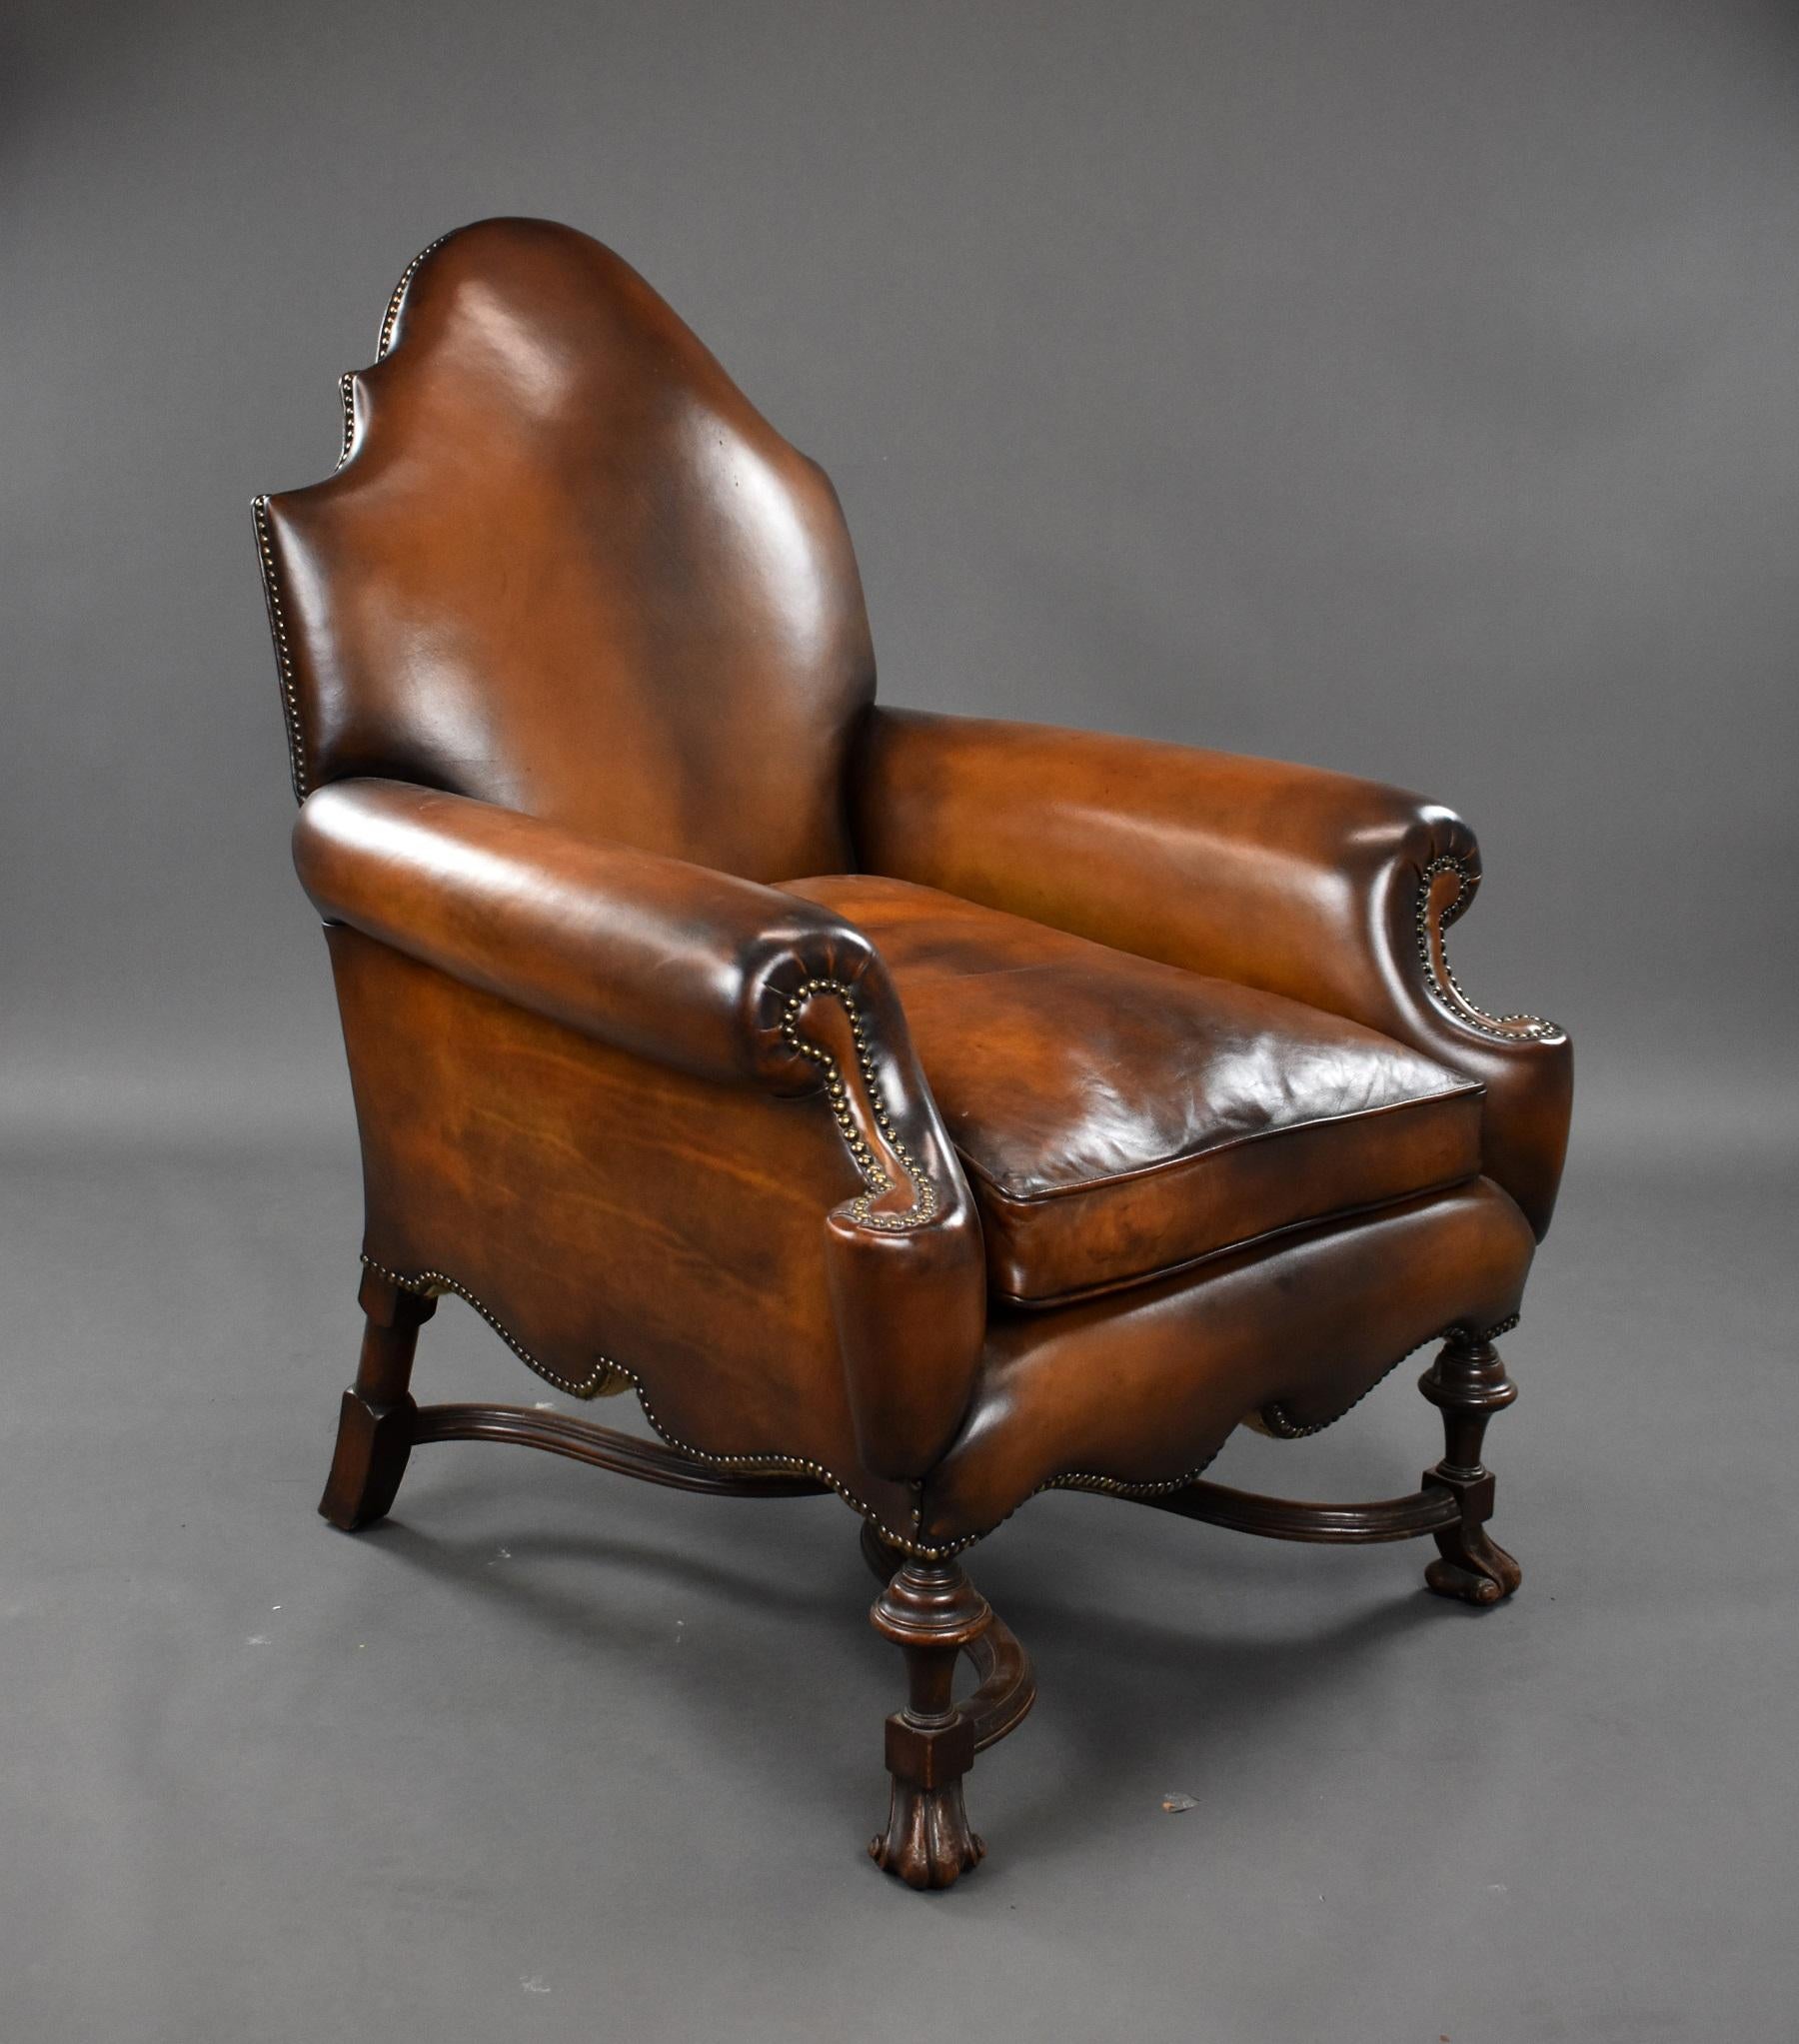 For sale is a fine quality Victorian walnut framed leather armchair. With a nicely shaped back and arms, the chair stands on carved feet united by a shaped stretcher with a finial to the centre. The chair is in excellent condition having been